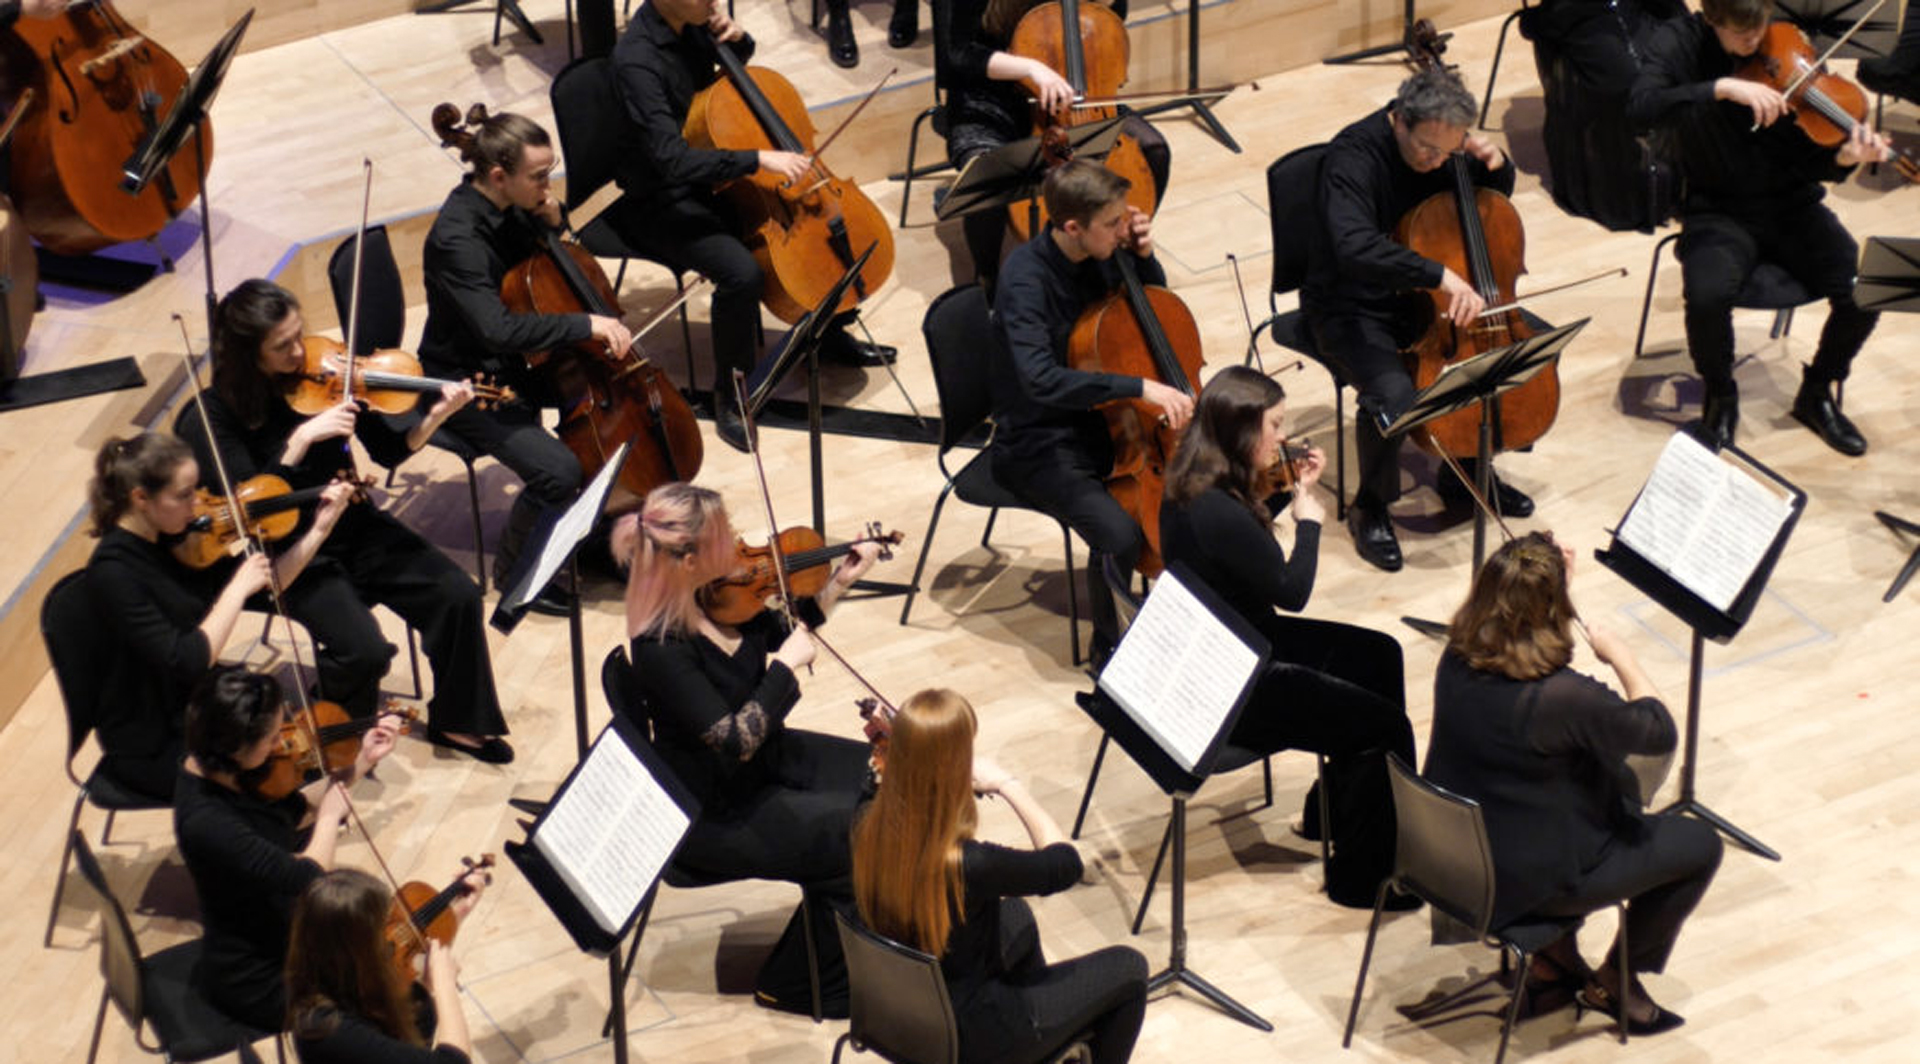 A string orchestra perform.